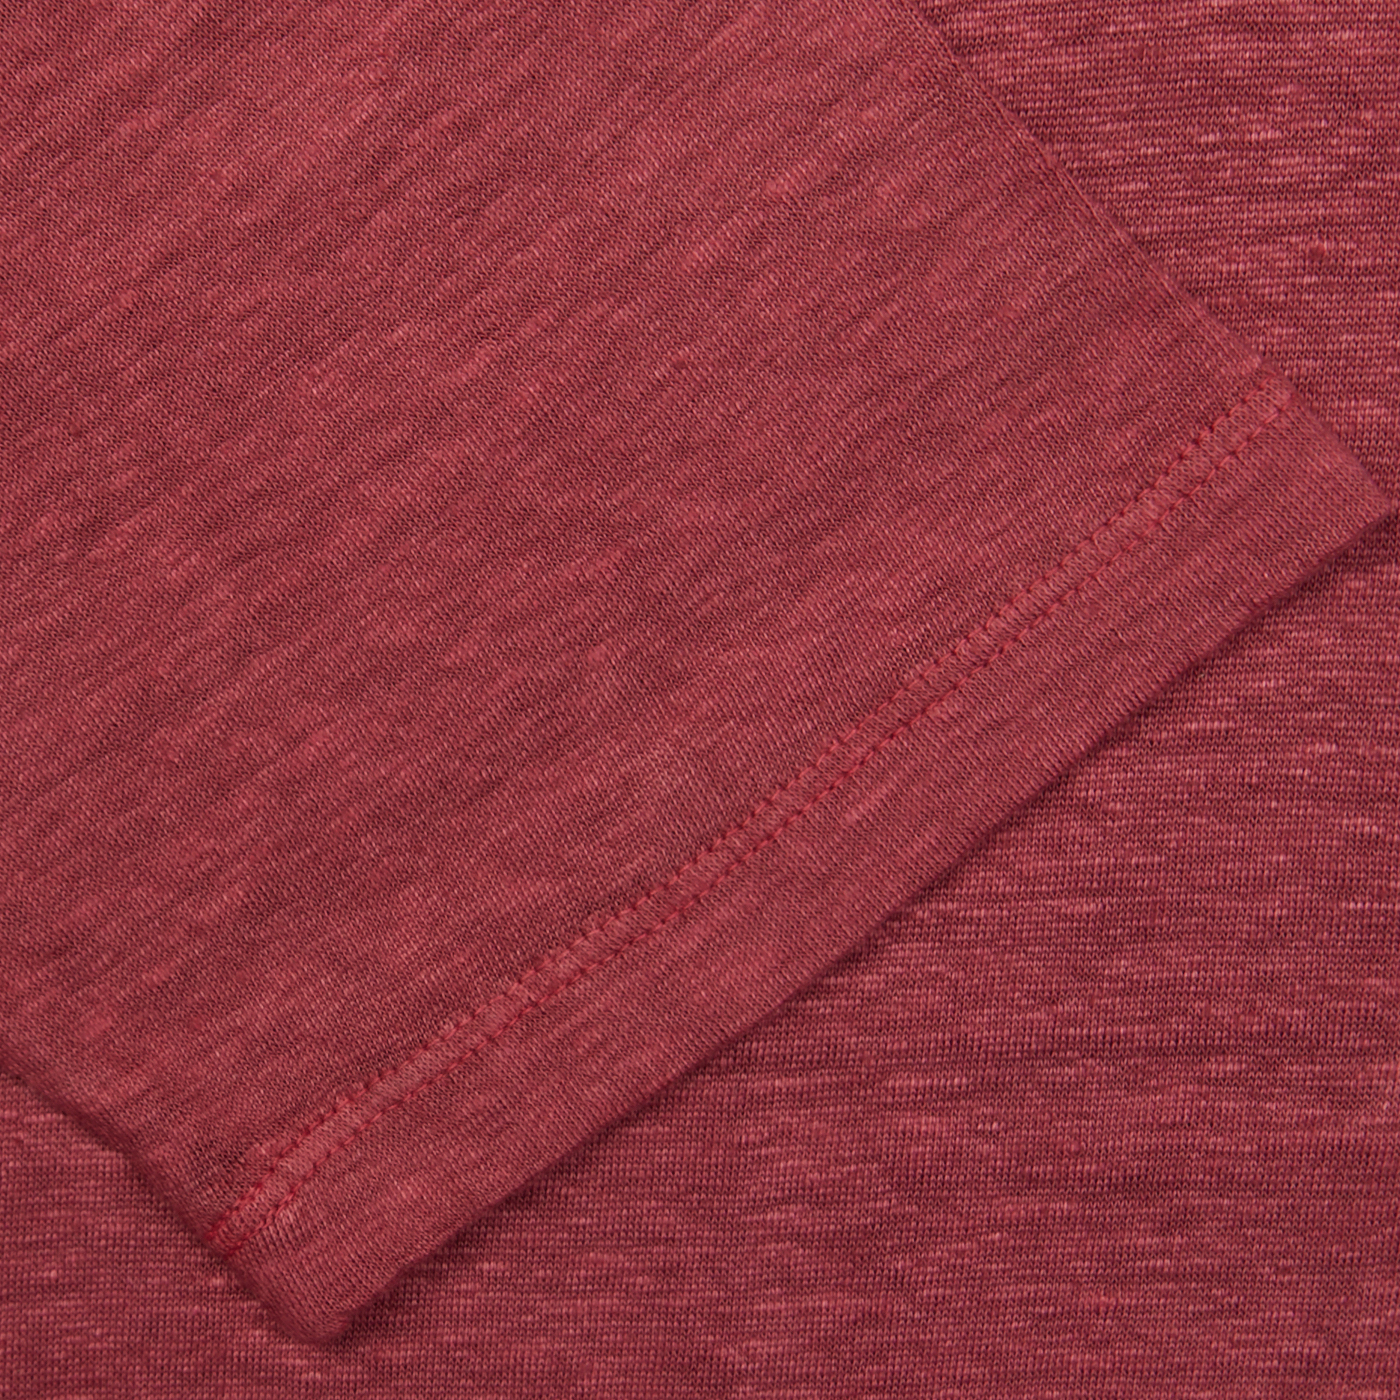 Close-up of a Massimo Alba Raspberry Red Linen Polo Shirt with a folded edge and visible stitching, dyed using natural chemical-free pigments.